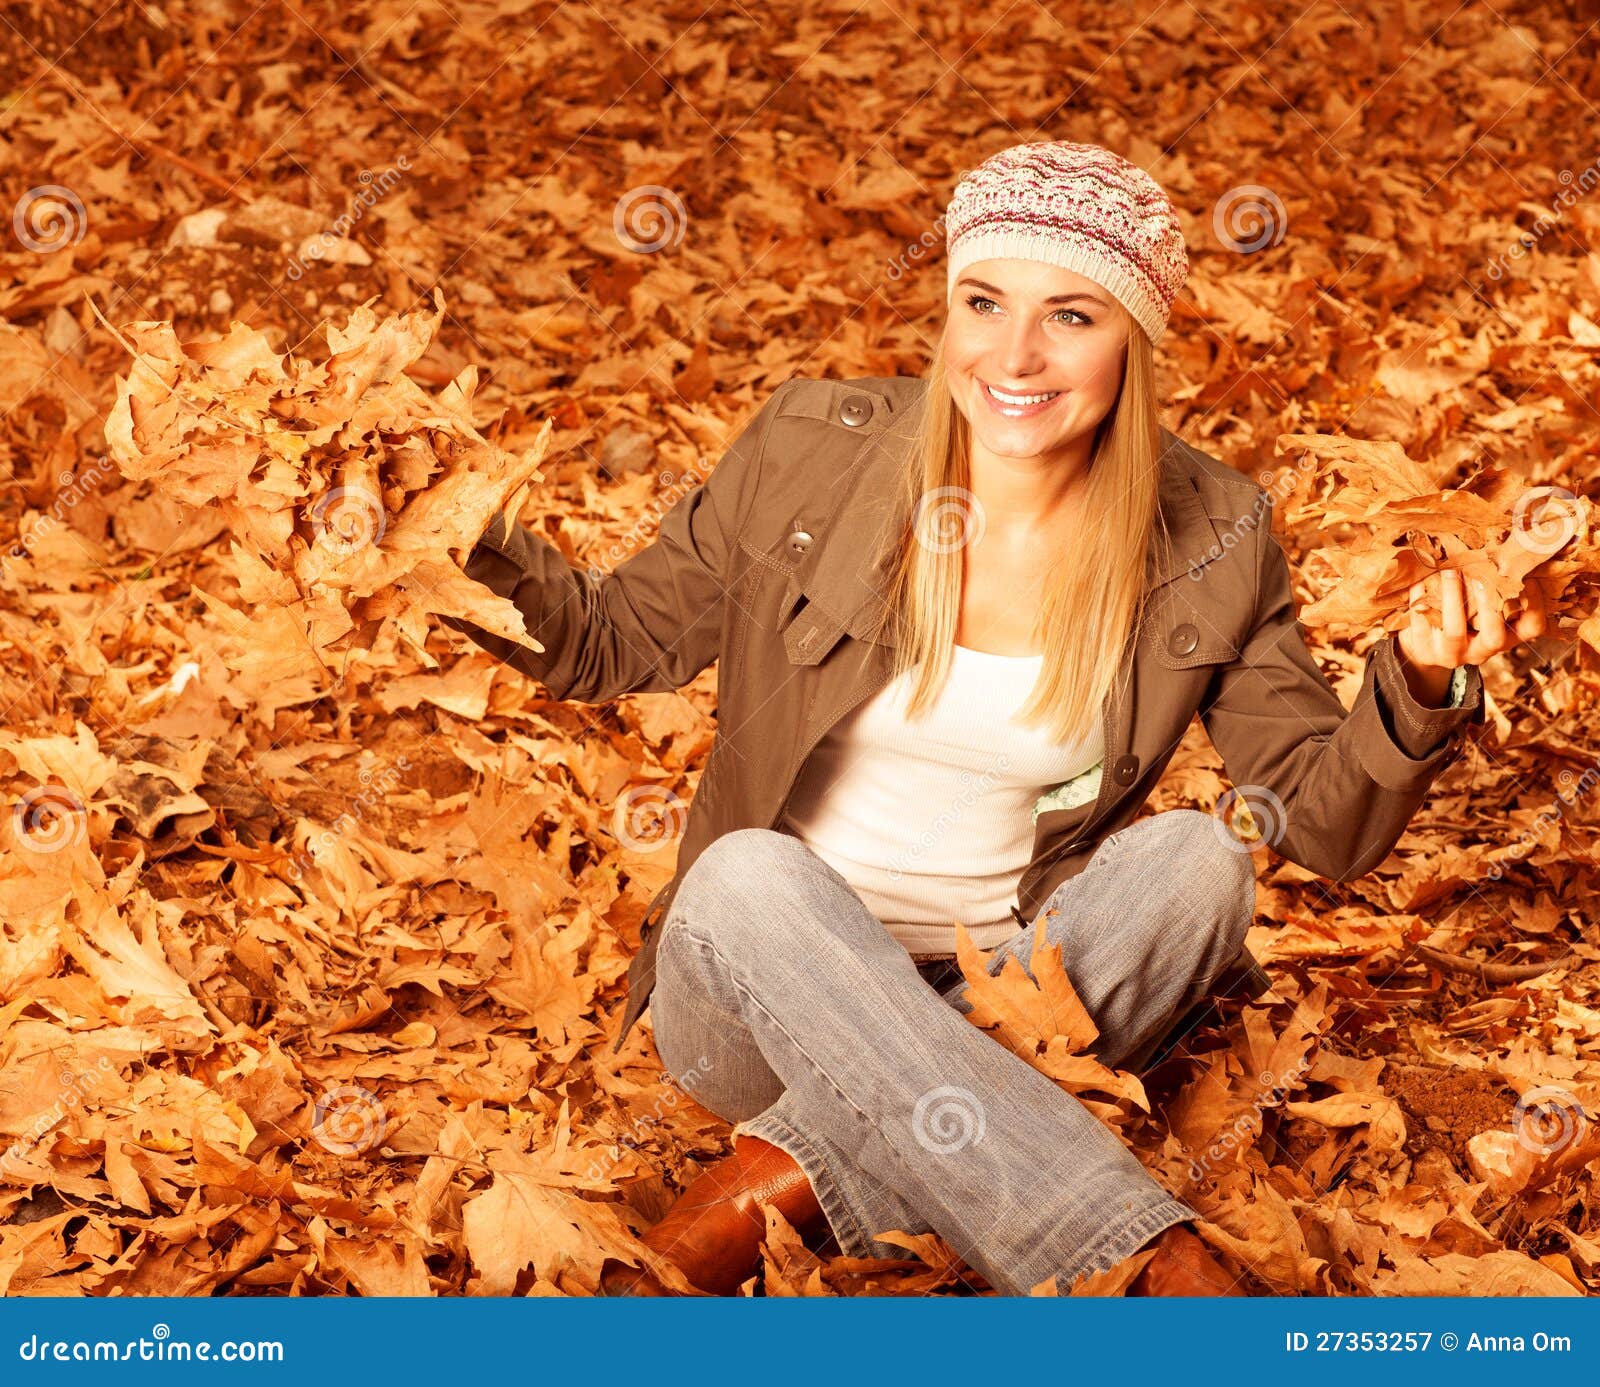 Girl Throwing Up Autumnal Leaves Royalty Free Stock Photography - Image ...